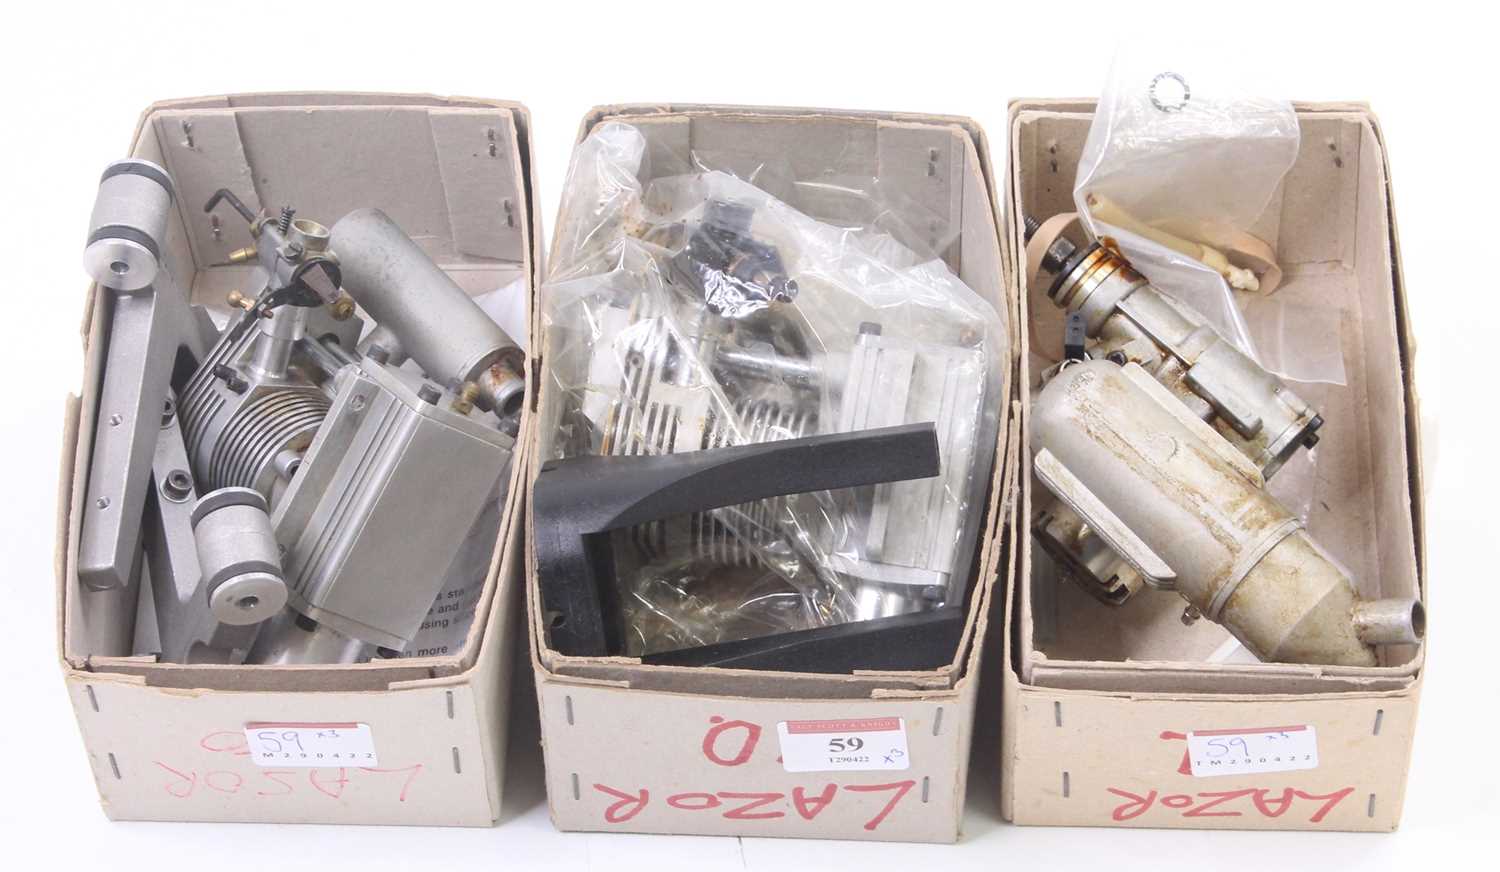 Collection of various radio-controlled aircraft Nitro engines, 3 examples to include 2 Laser 4-